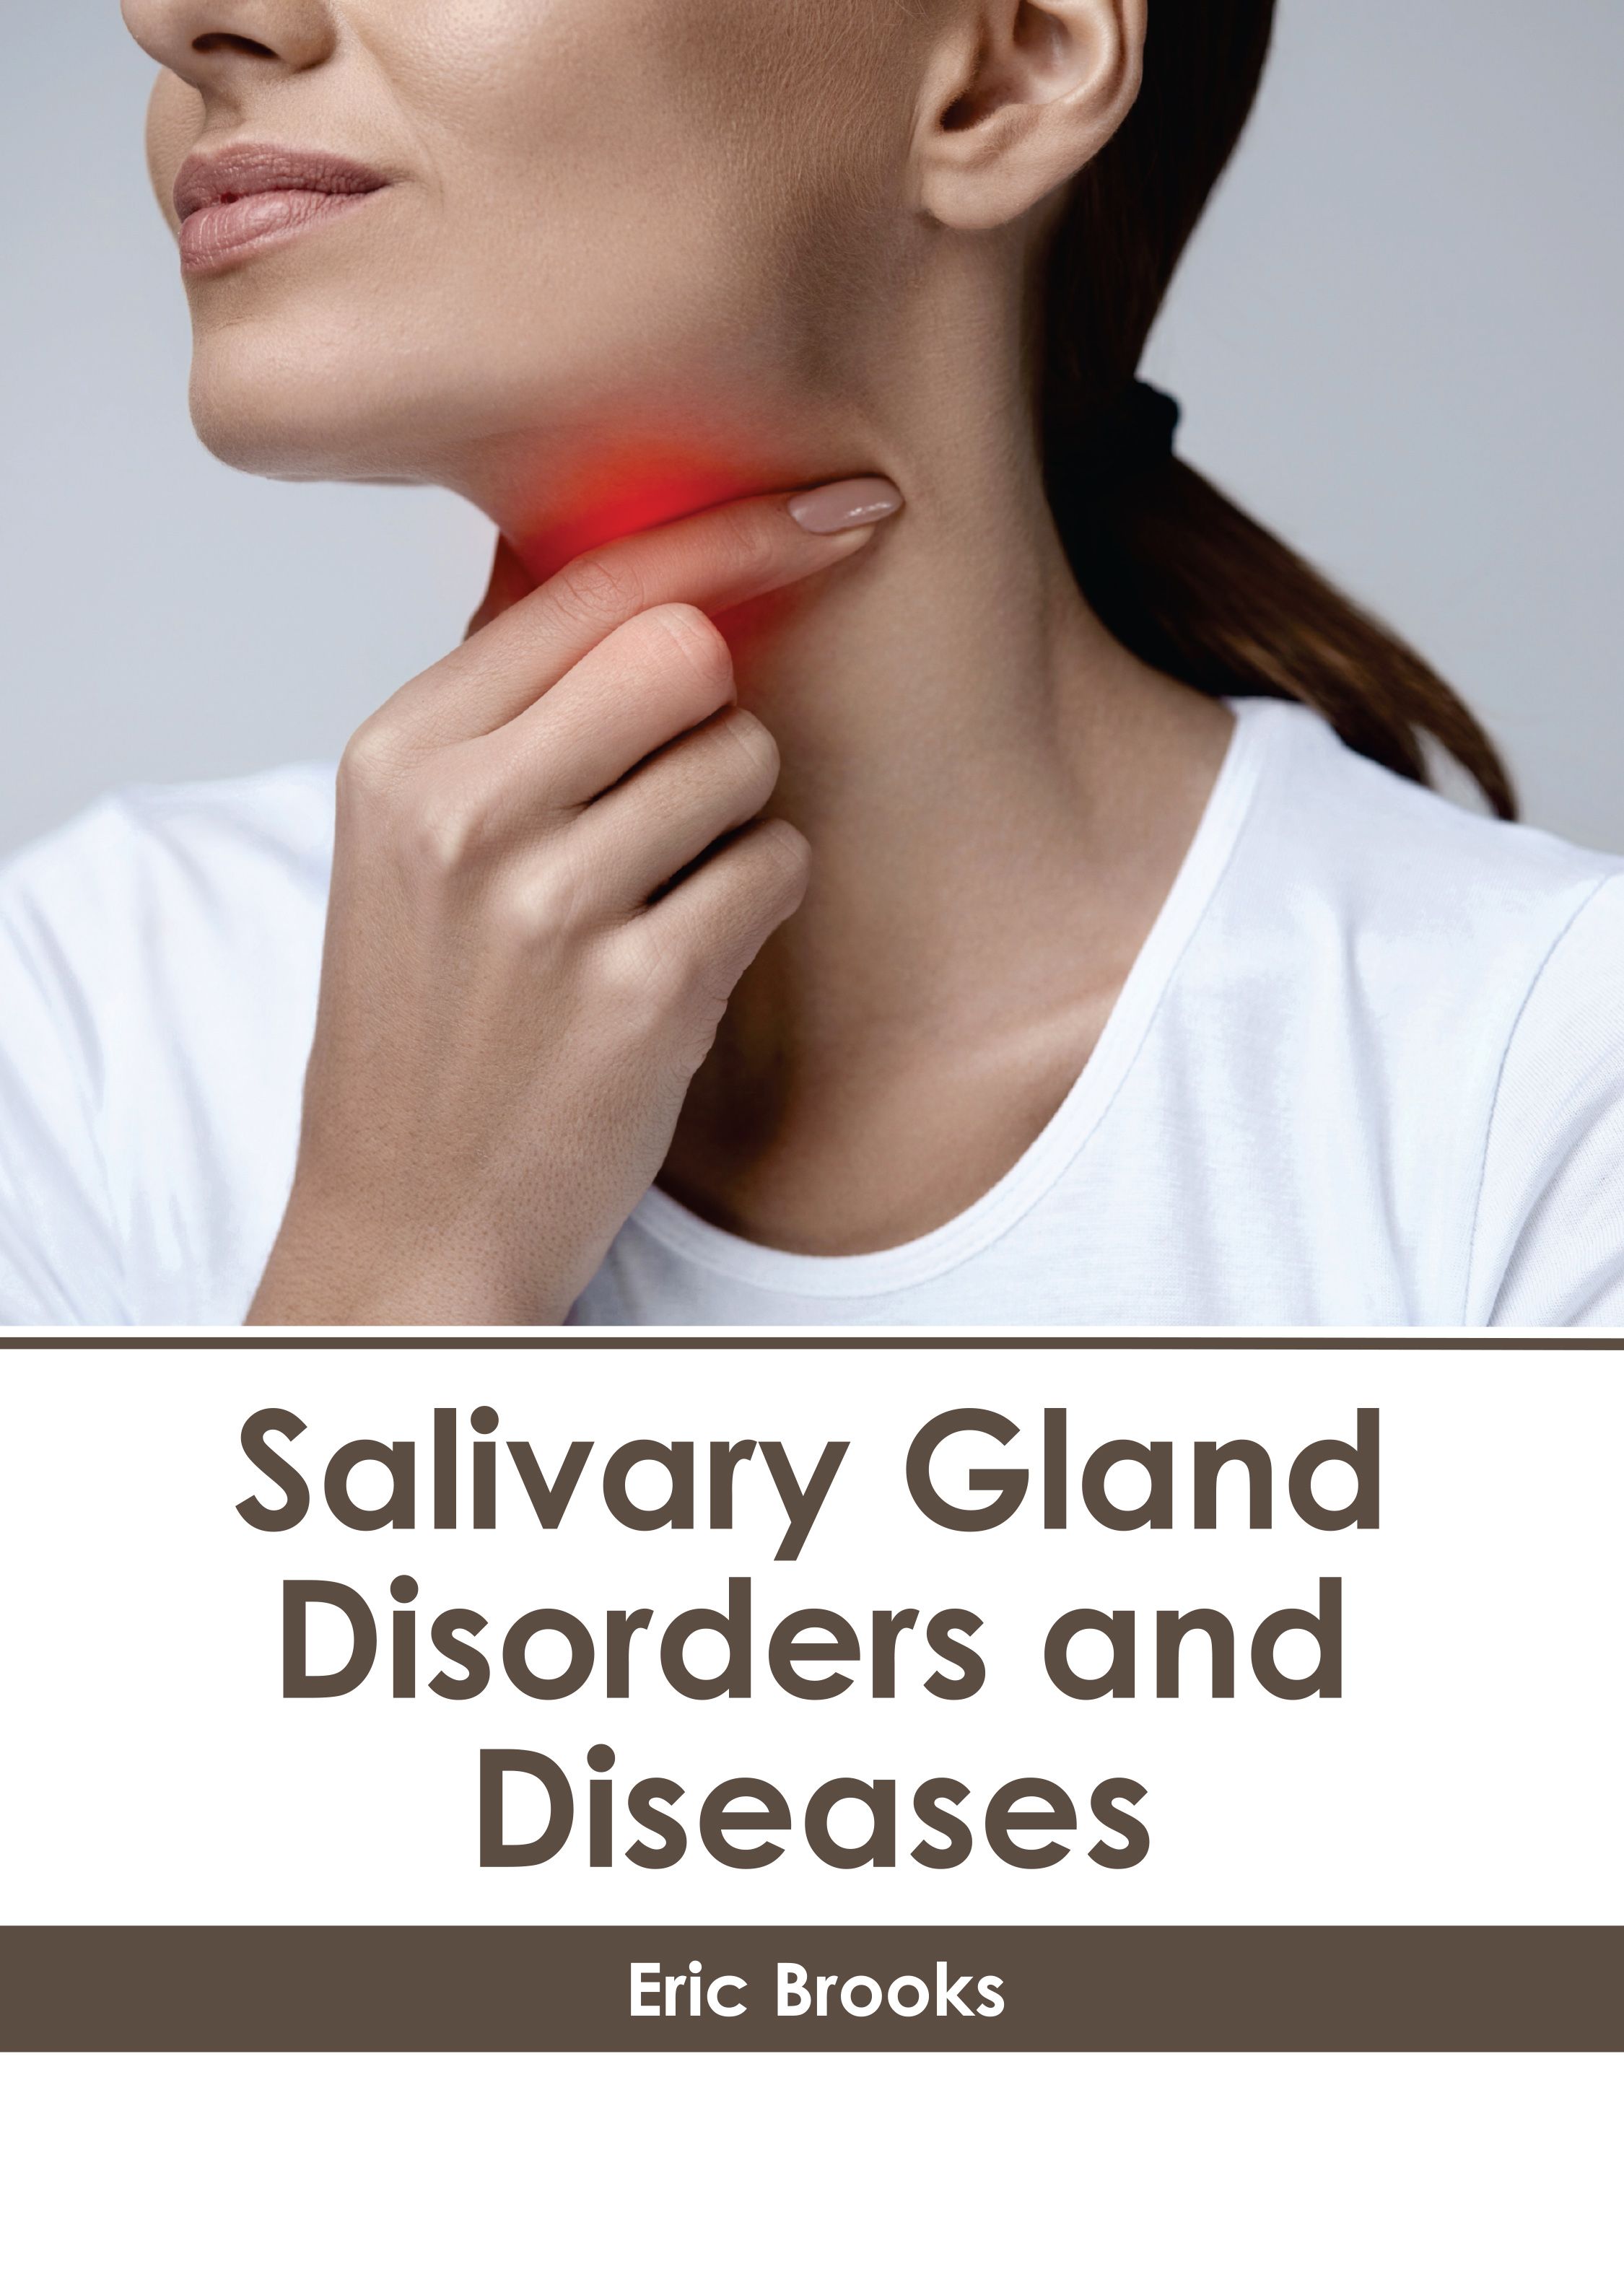 SALIVARY GLAND DISORDERS AND DISEASES